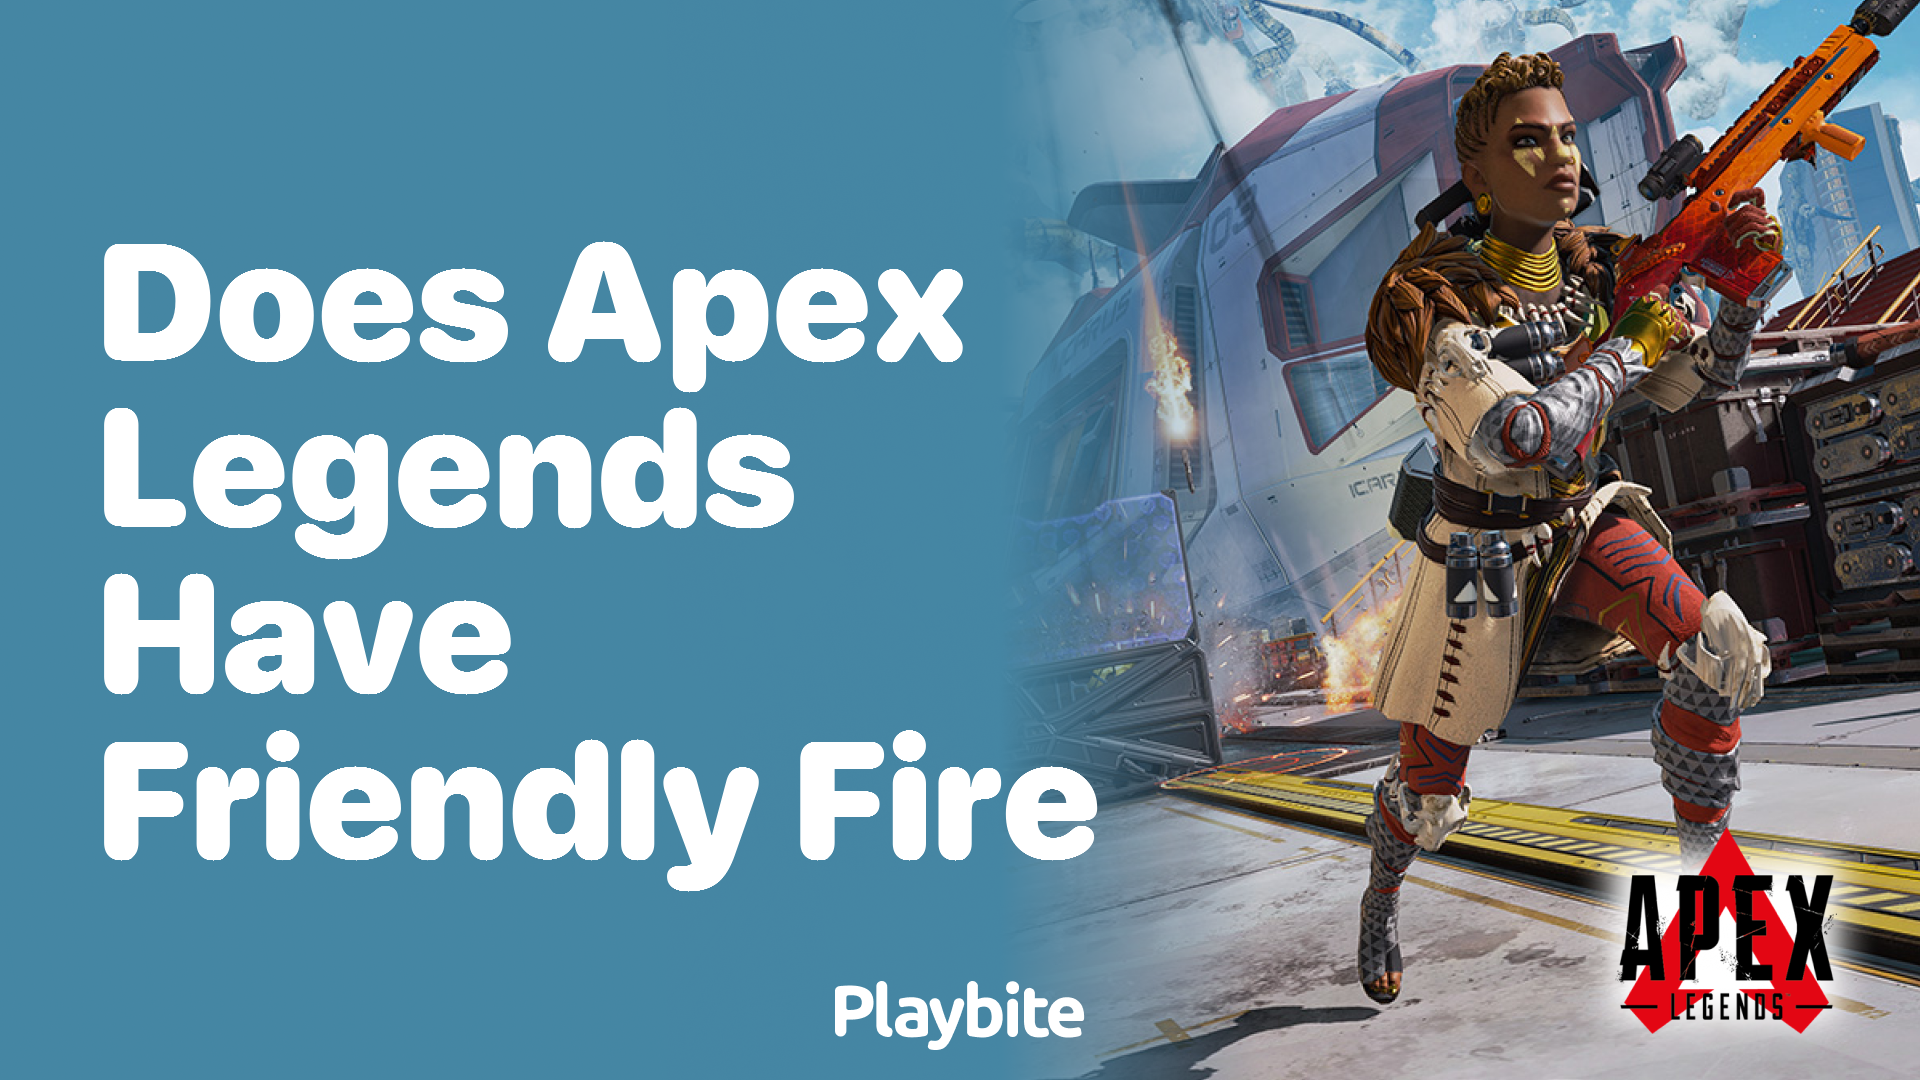 Does Apex Legends have friendly fire?